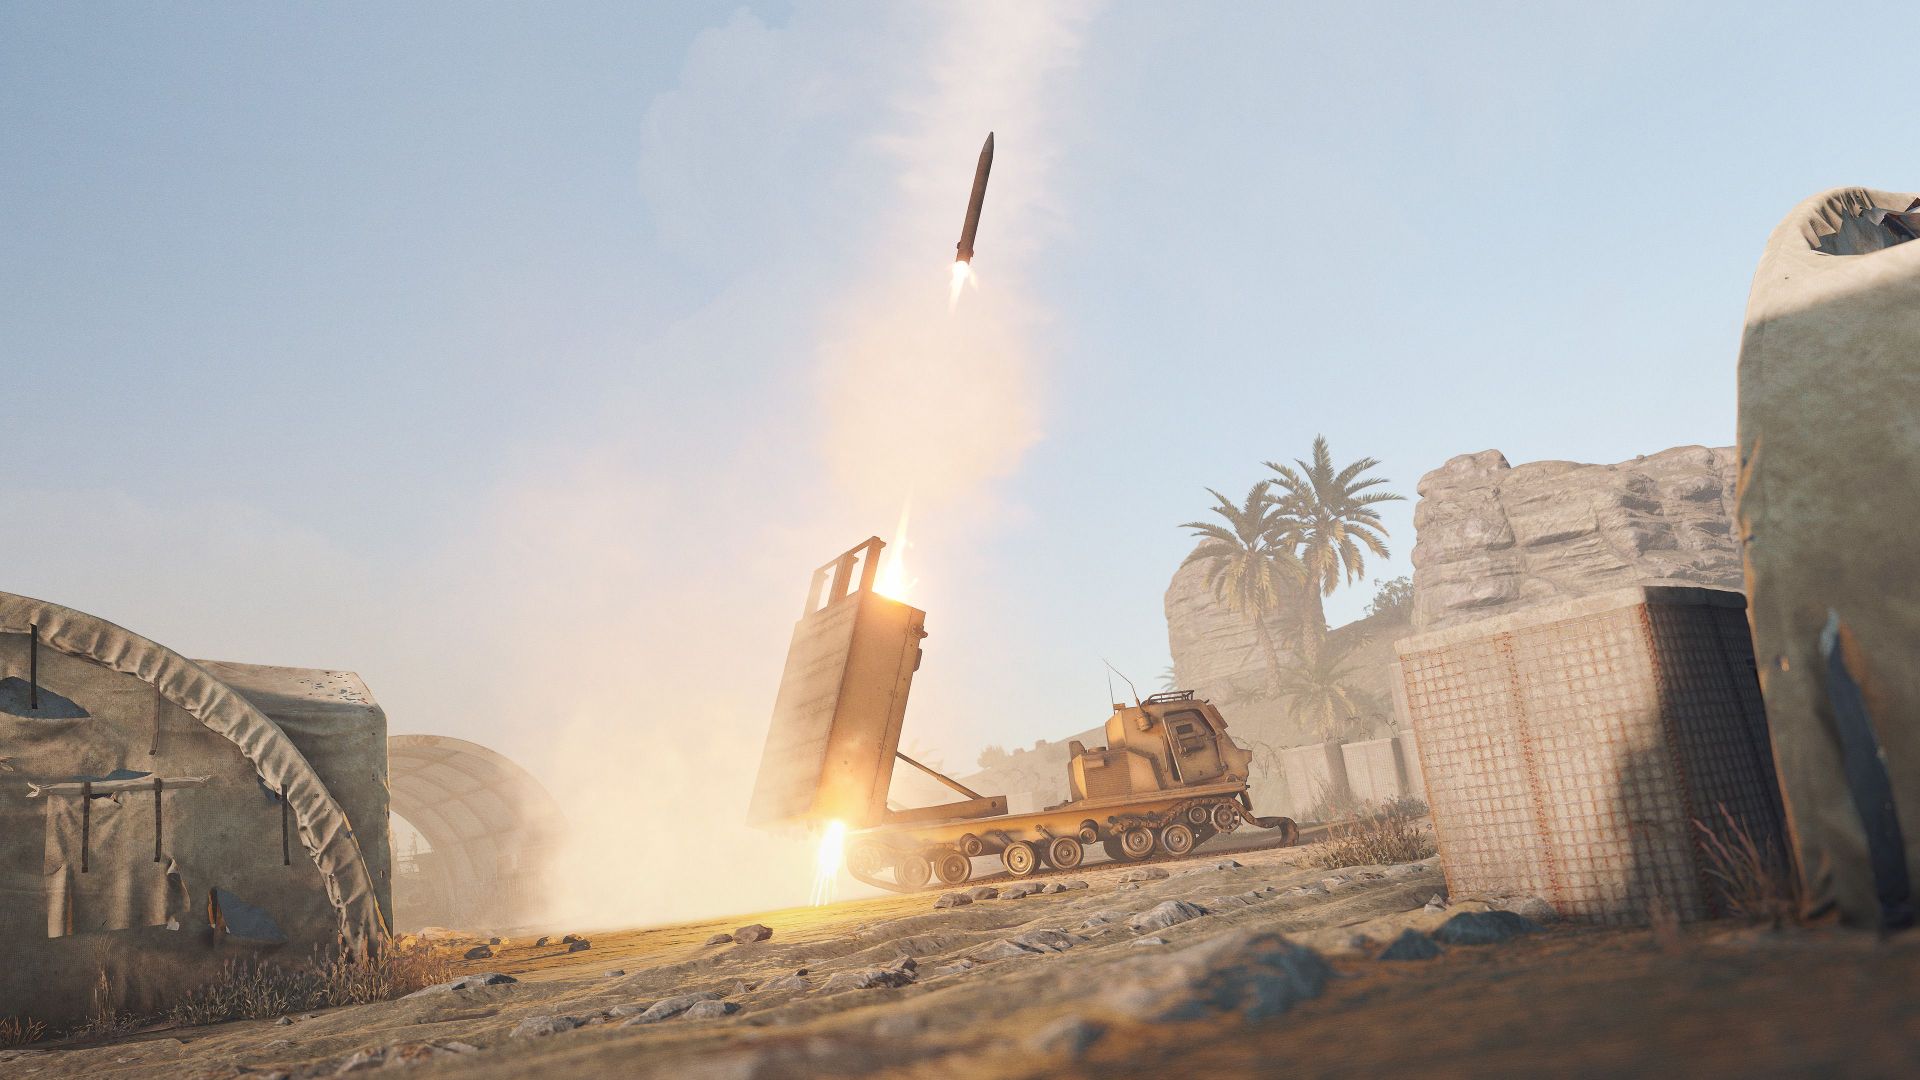 Rust's November update brings desert bases and new rocket launching system